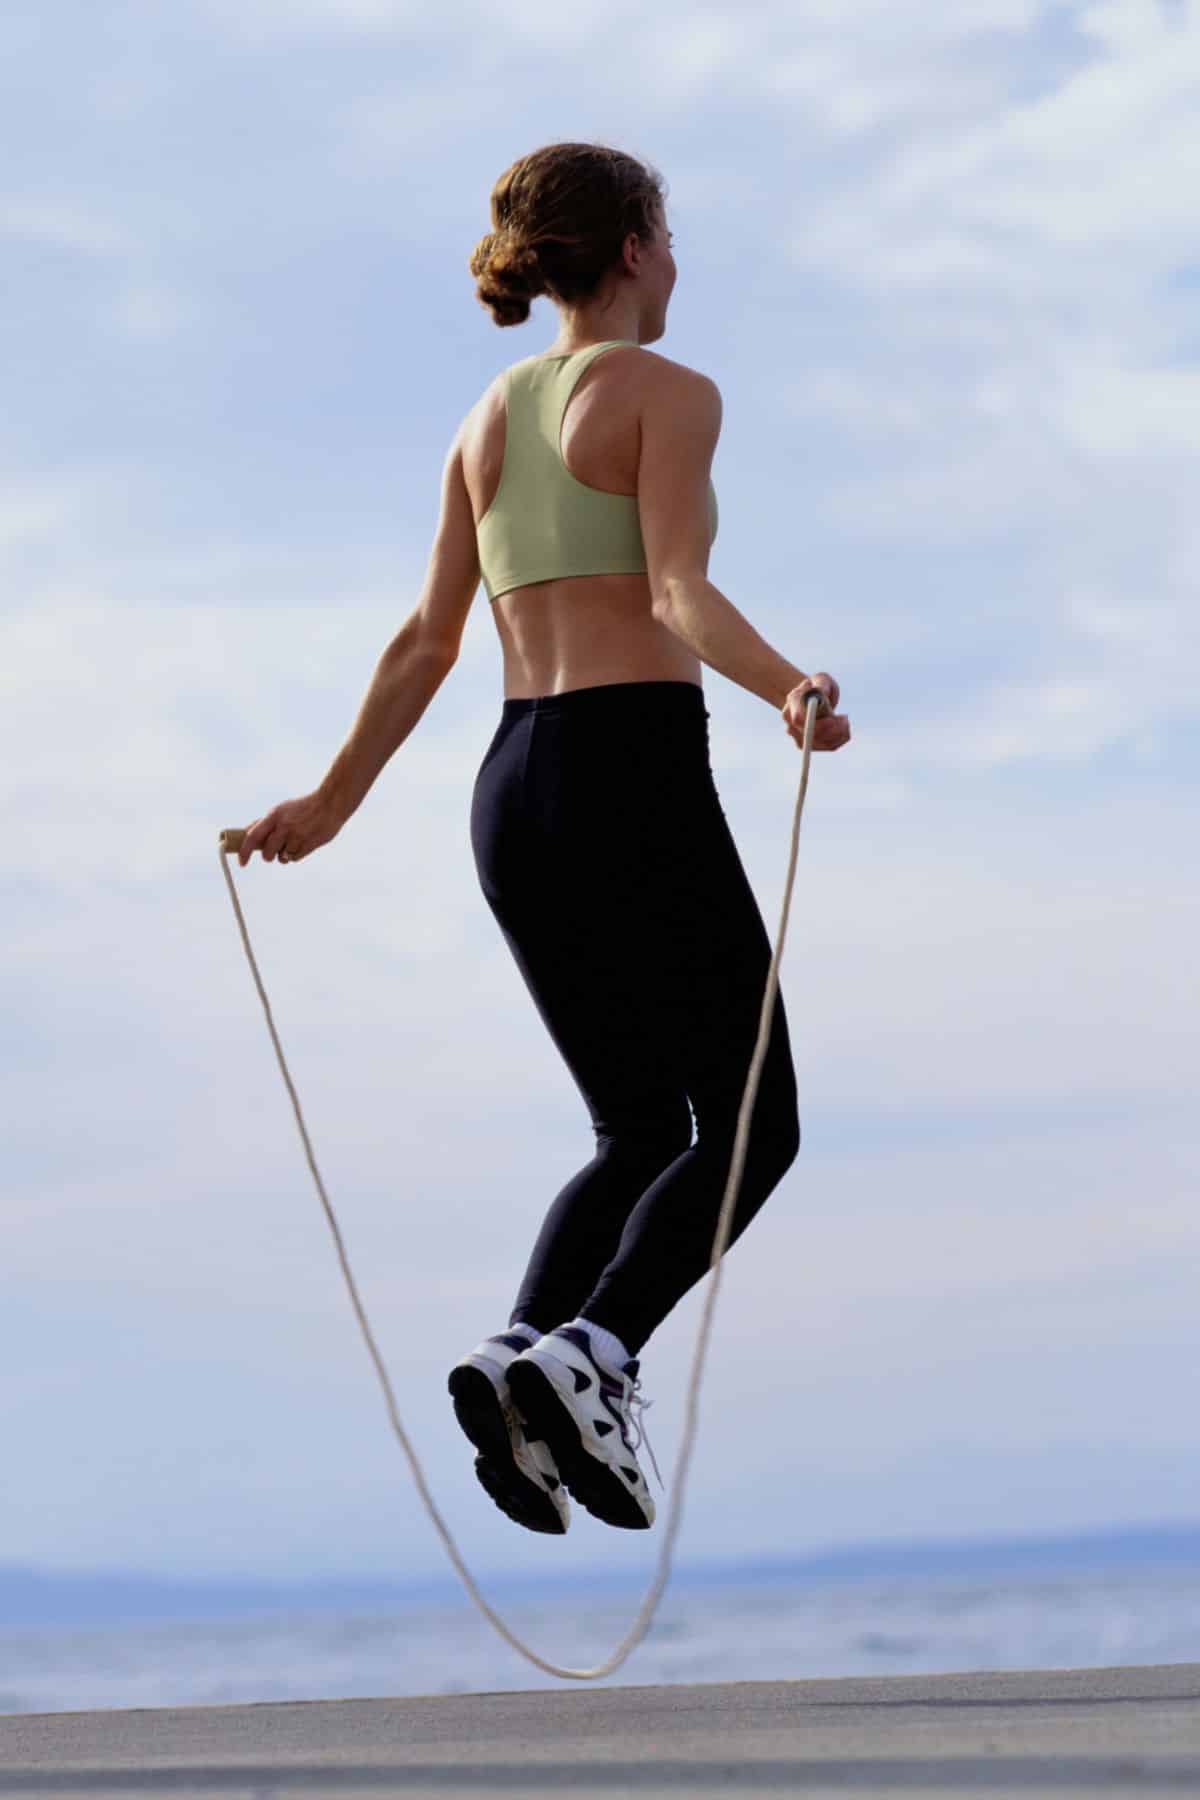 a woman jumping rope.